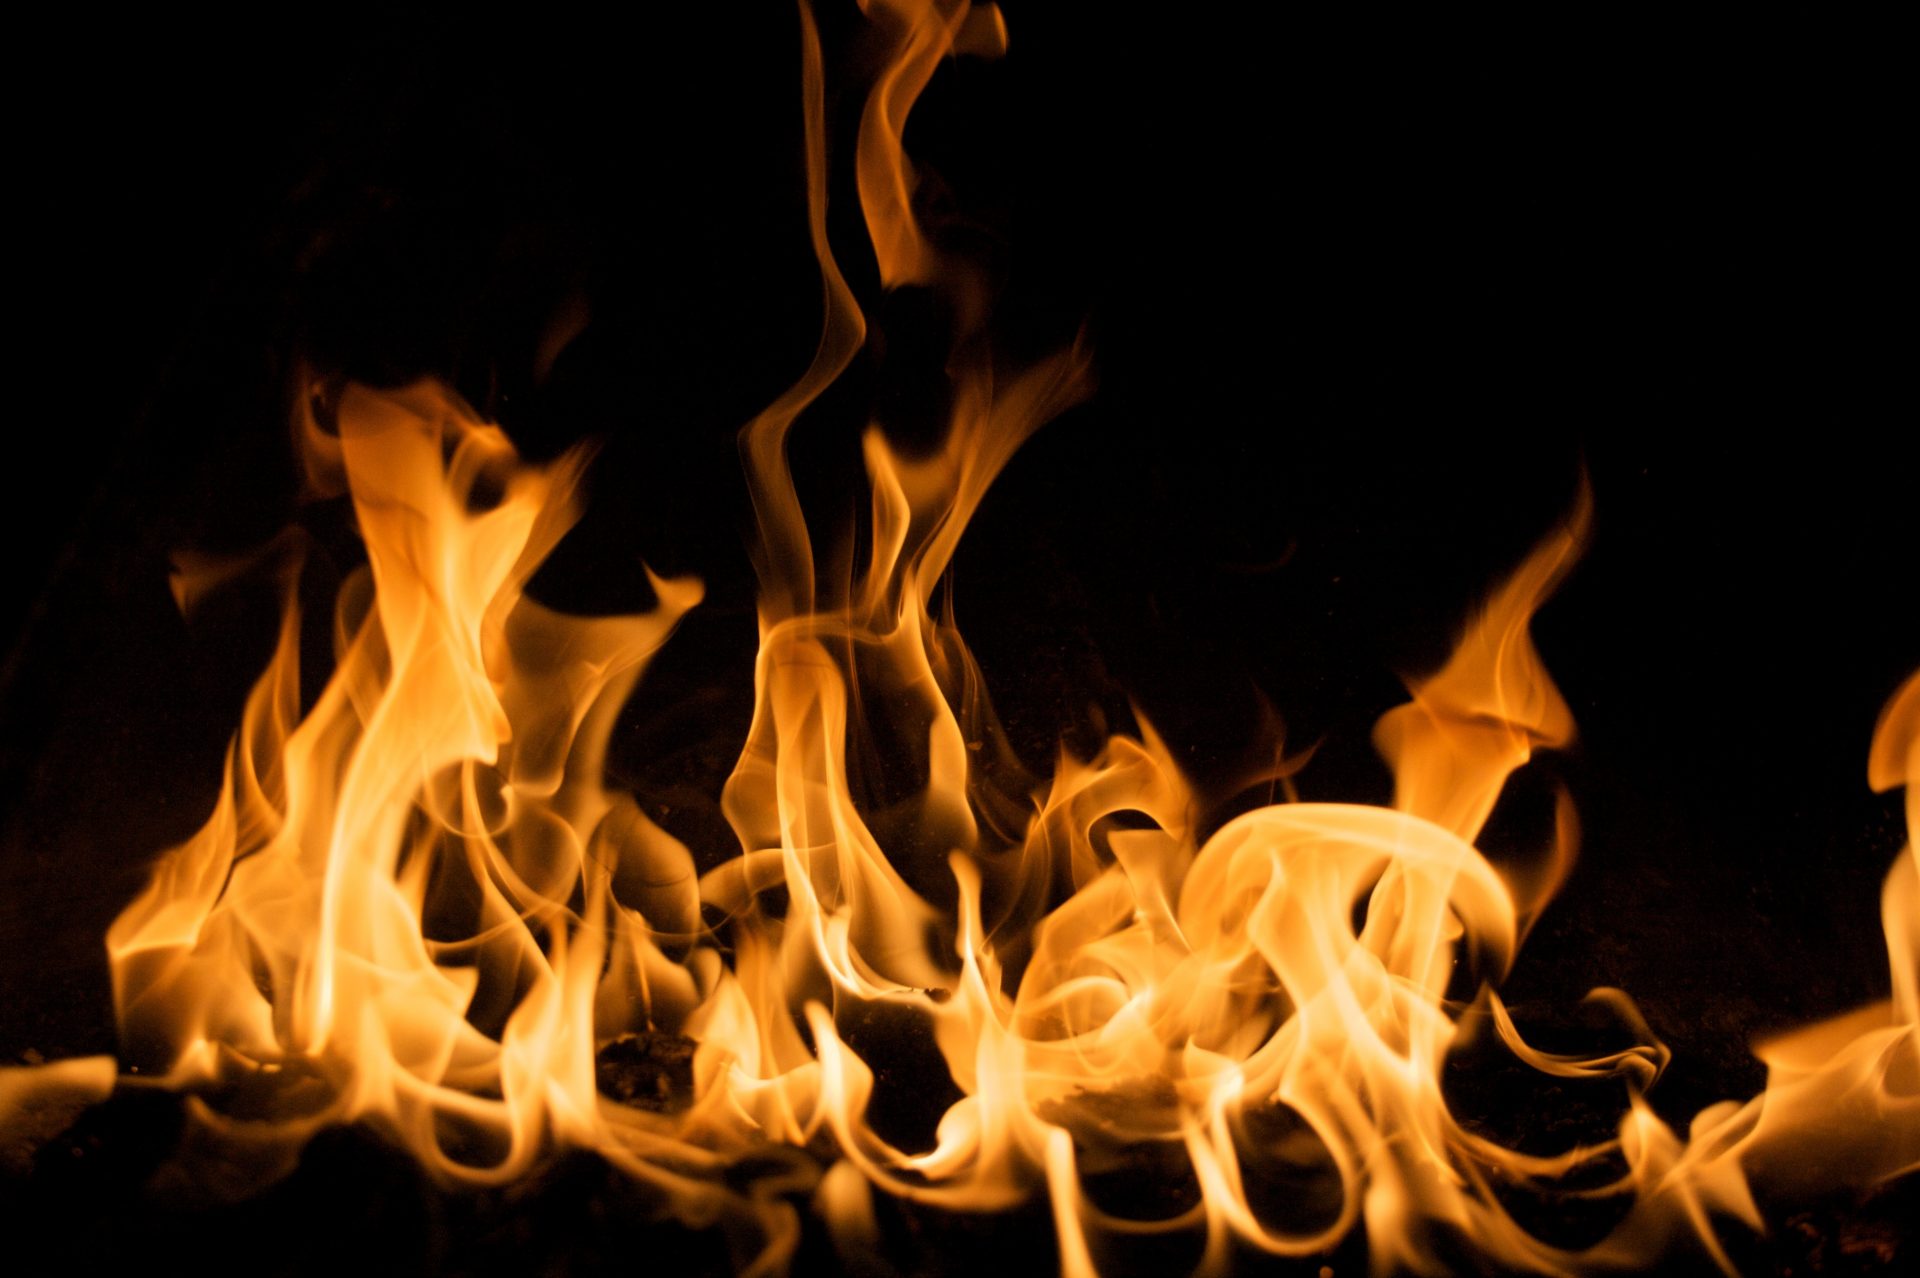 Pictures of flames dancing